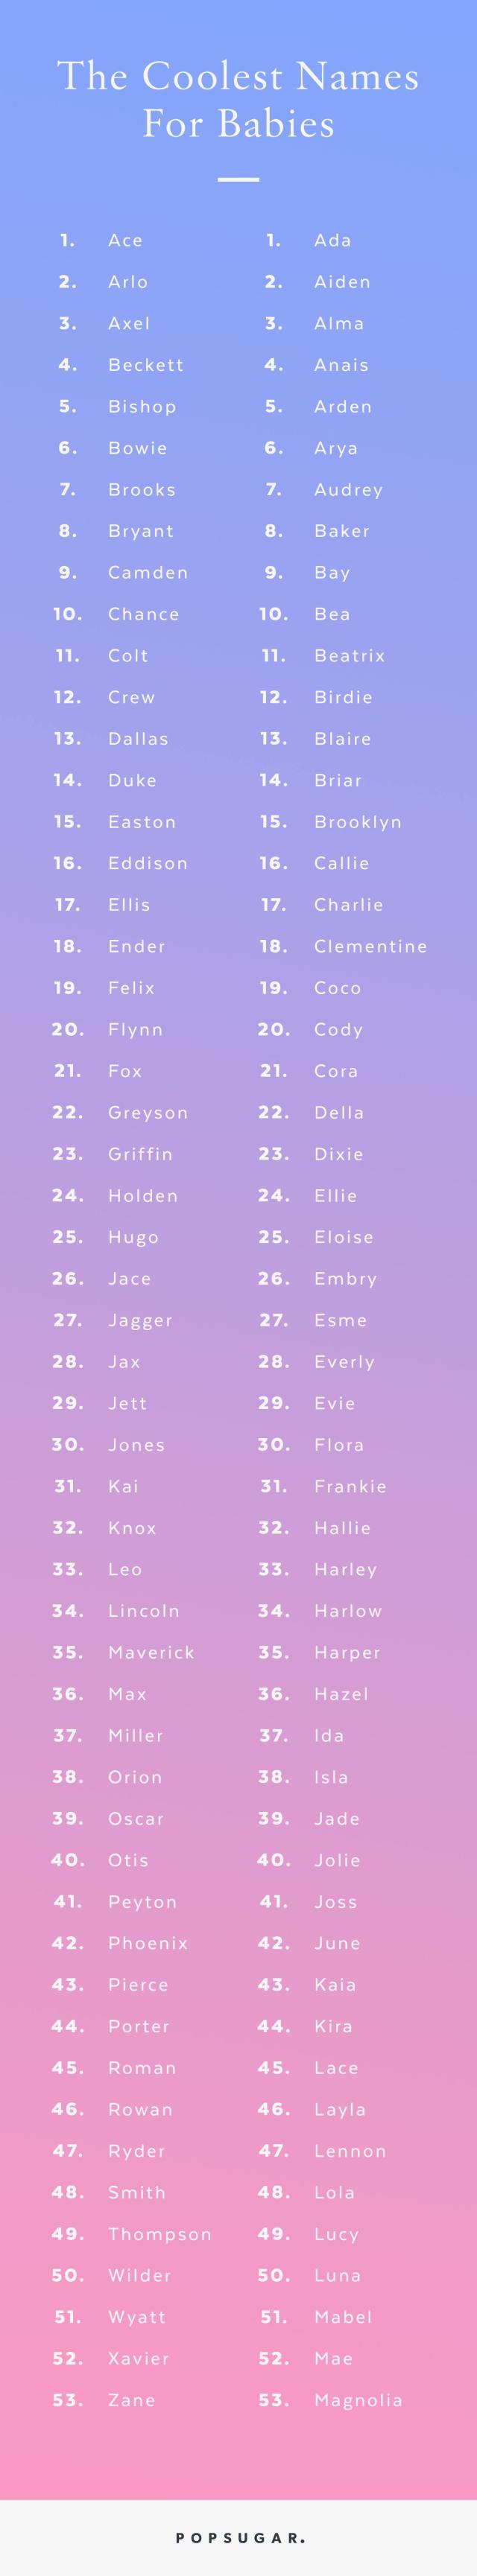 The 135 Coolest Names For Babies In 22